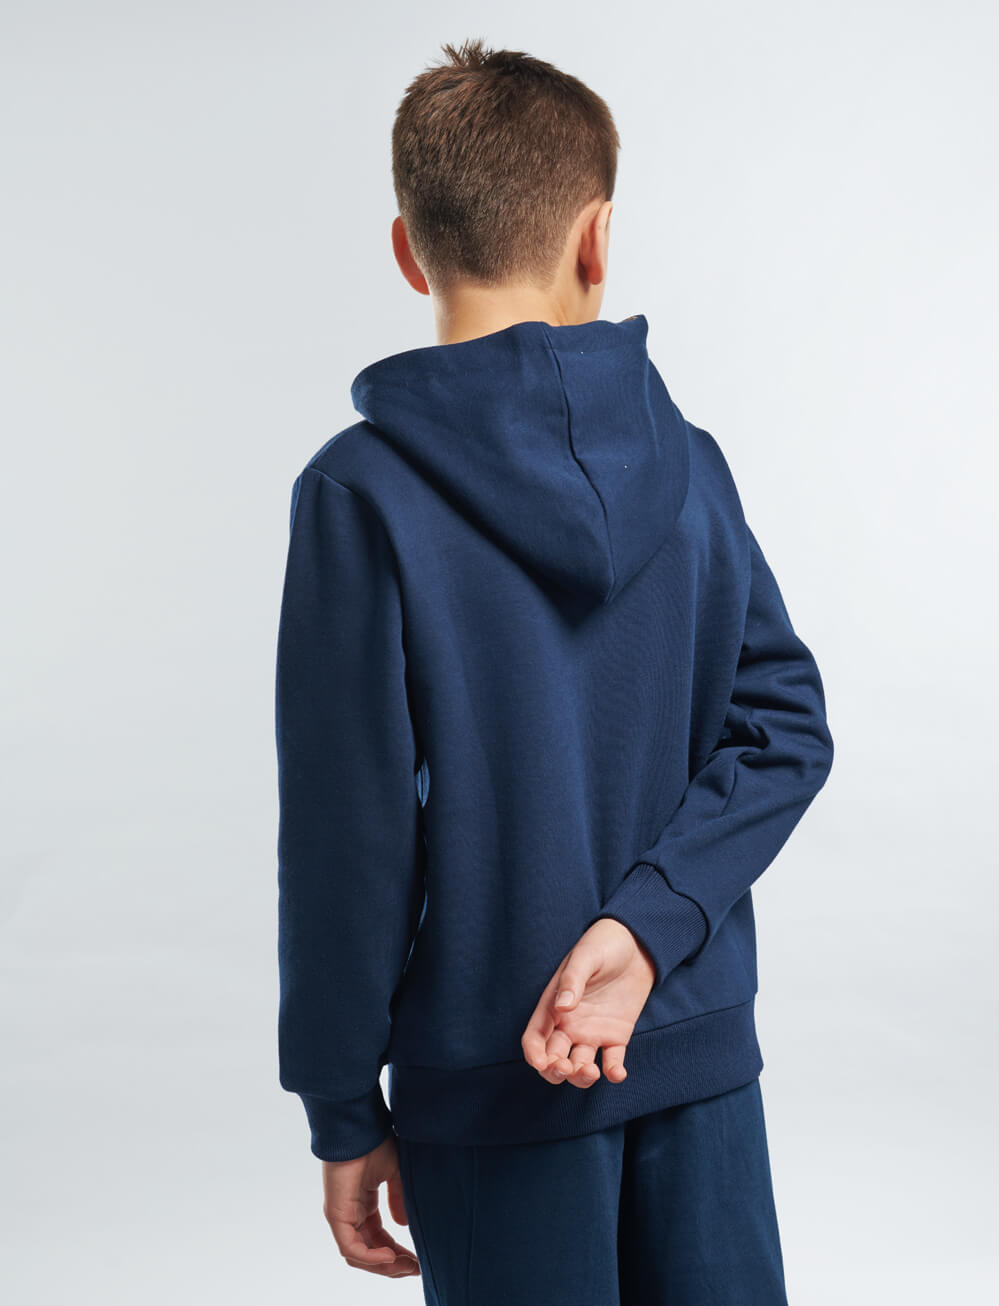 Official Manchester City Kids Crest Hoodie - Navy - The World Football Store